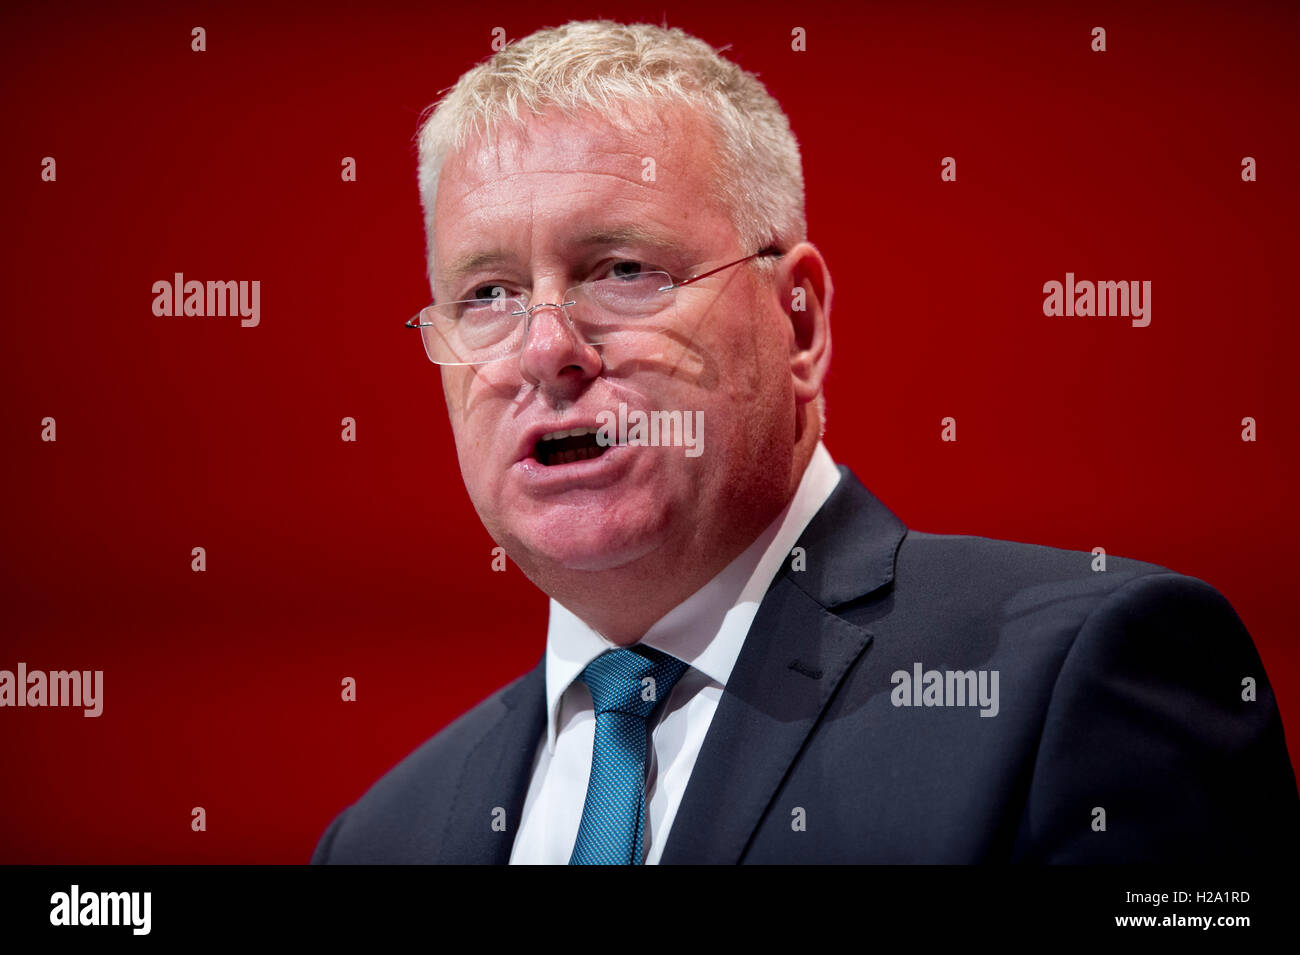 Liverpool, UK. 26th September 2016. Shadow Minister for Trade Unions and Civil Society Ian Lavery MP speaks at day two of the Labour Party Conference in Liverpool. Credit:  Russell Hart/Alamy Live News. Stock Photo